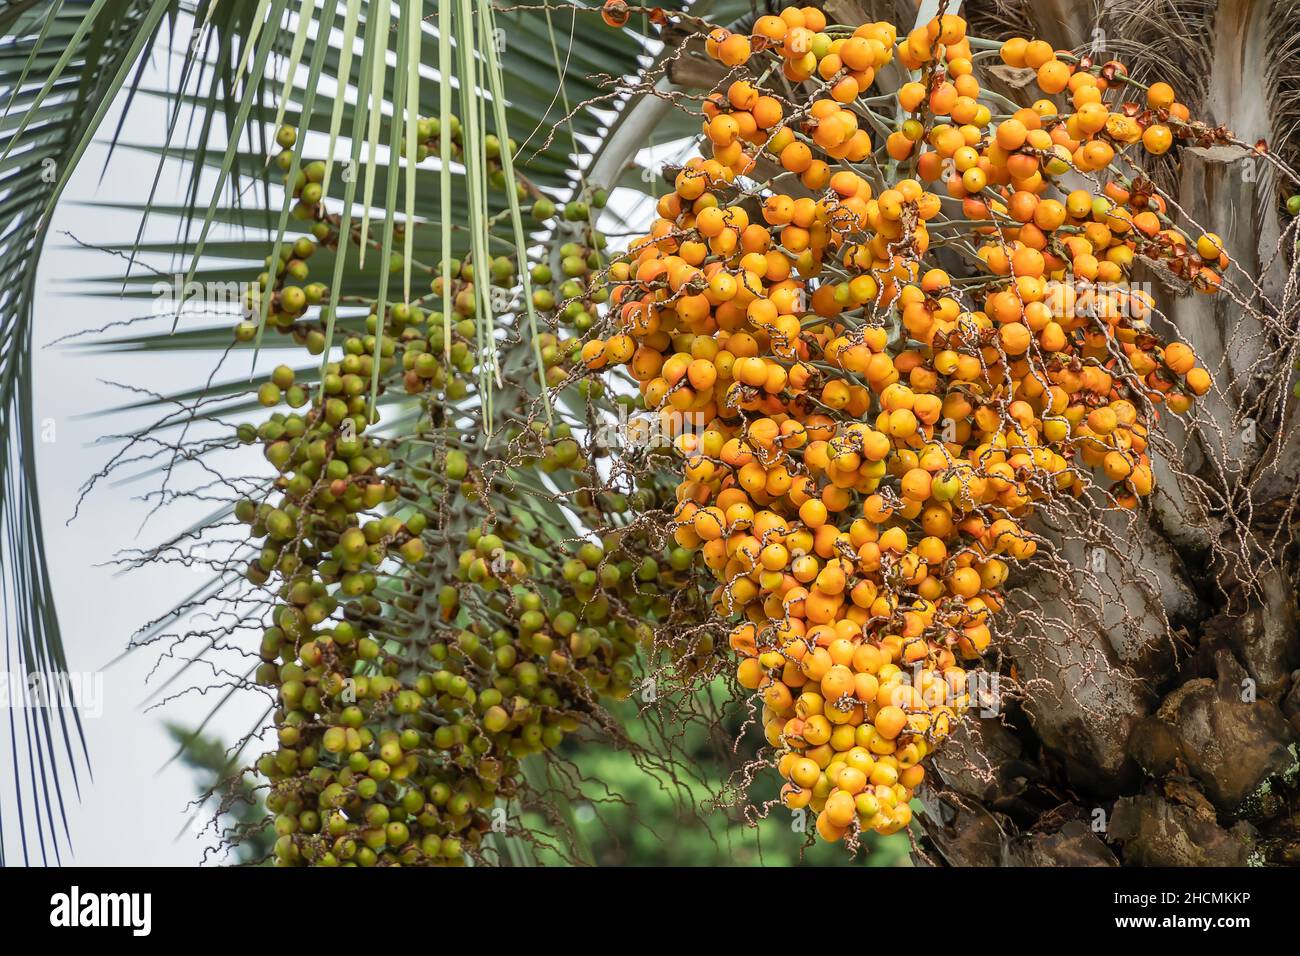 Close-up of yellow and green fruits of the Pindo jelly palm (butia capitata) hanging from a tree Stock Photo